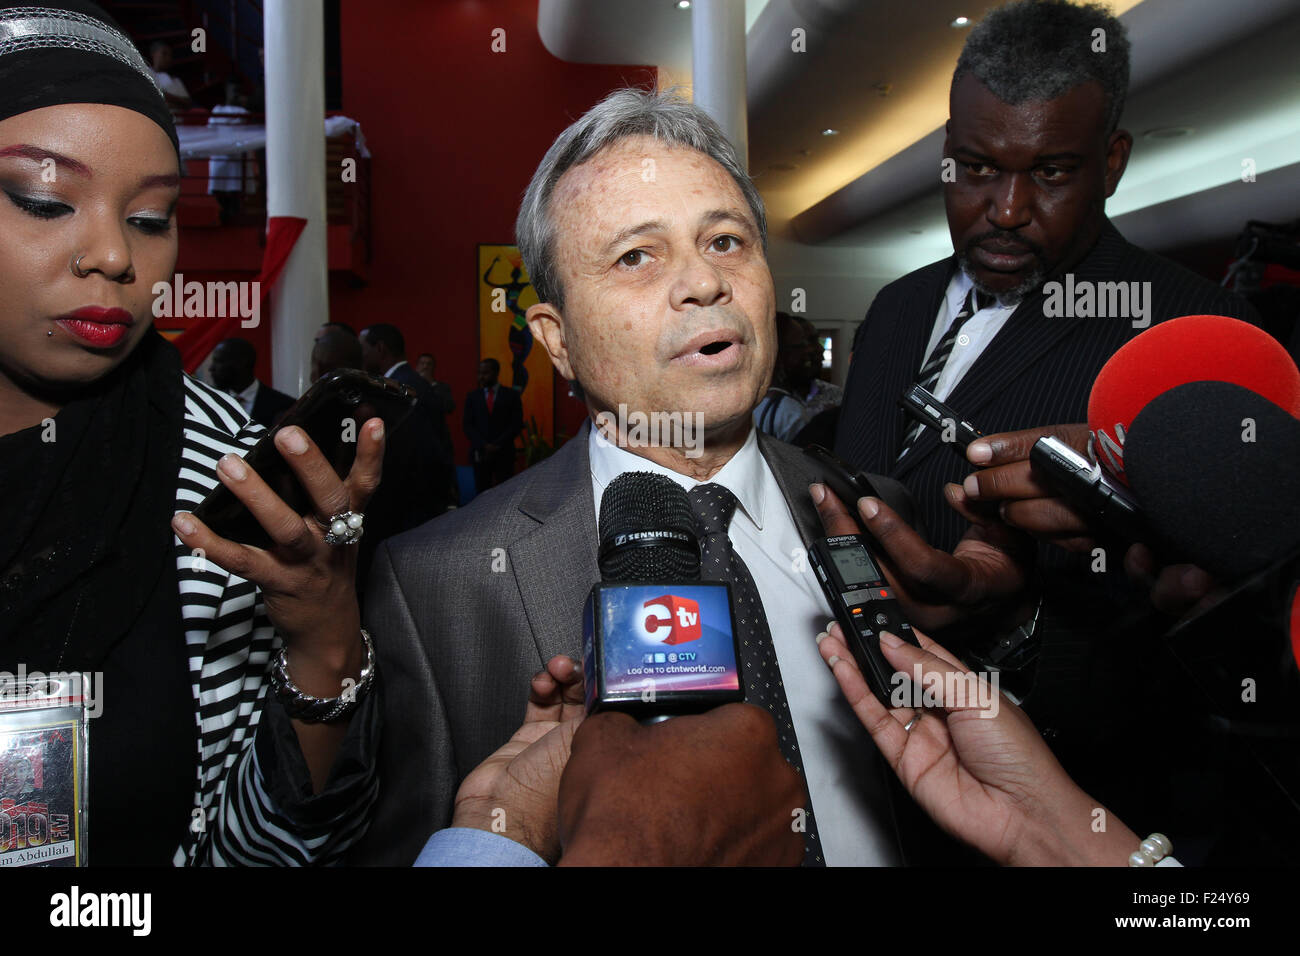 Port of Spain, Trinidad. 11th Sept, 2015. Colm Imbert (C), Minister of Finance, speaks to journalists after the swearing-in ceremony for Ministers of Government at Queen's Hall in Port of Spain, Trinidad on September 11, 2015. Credit:  SEAN DRAKES/Alamy Live News Stock Photo